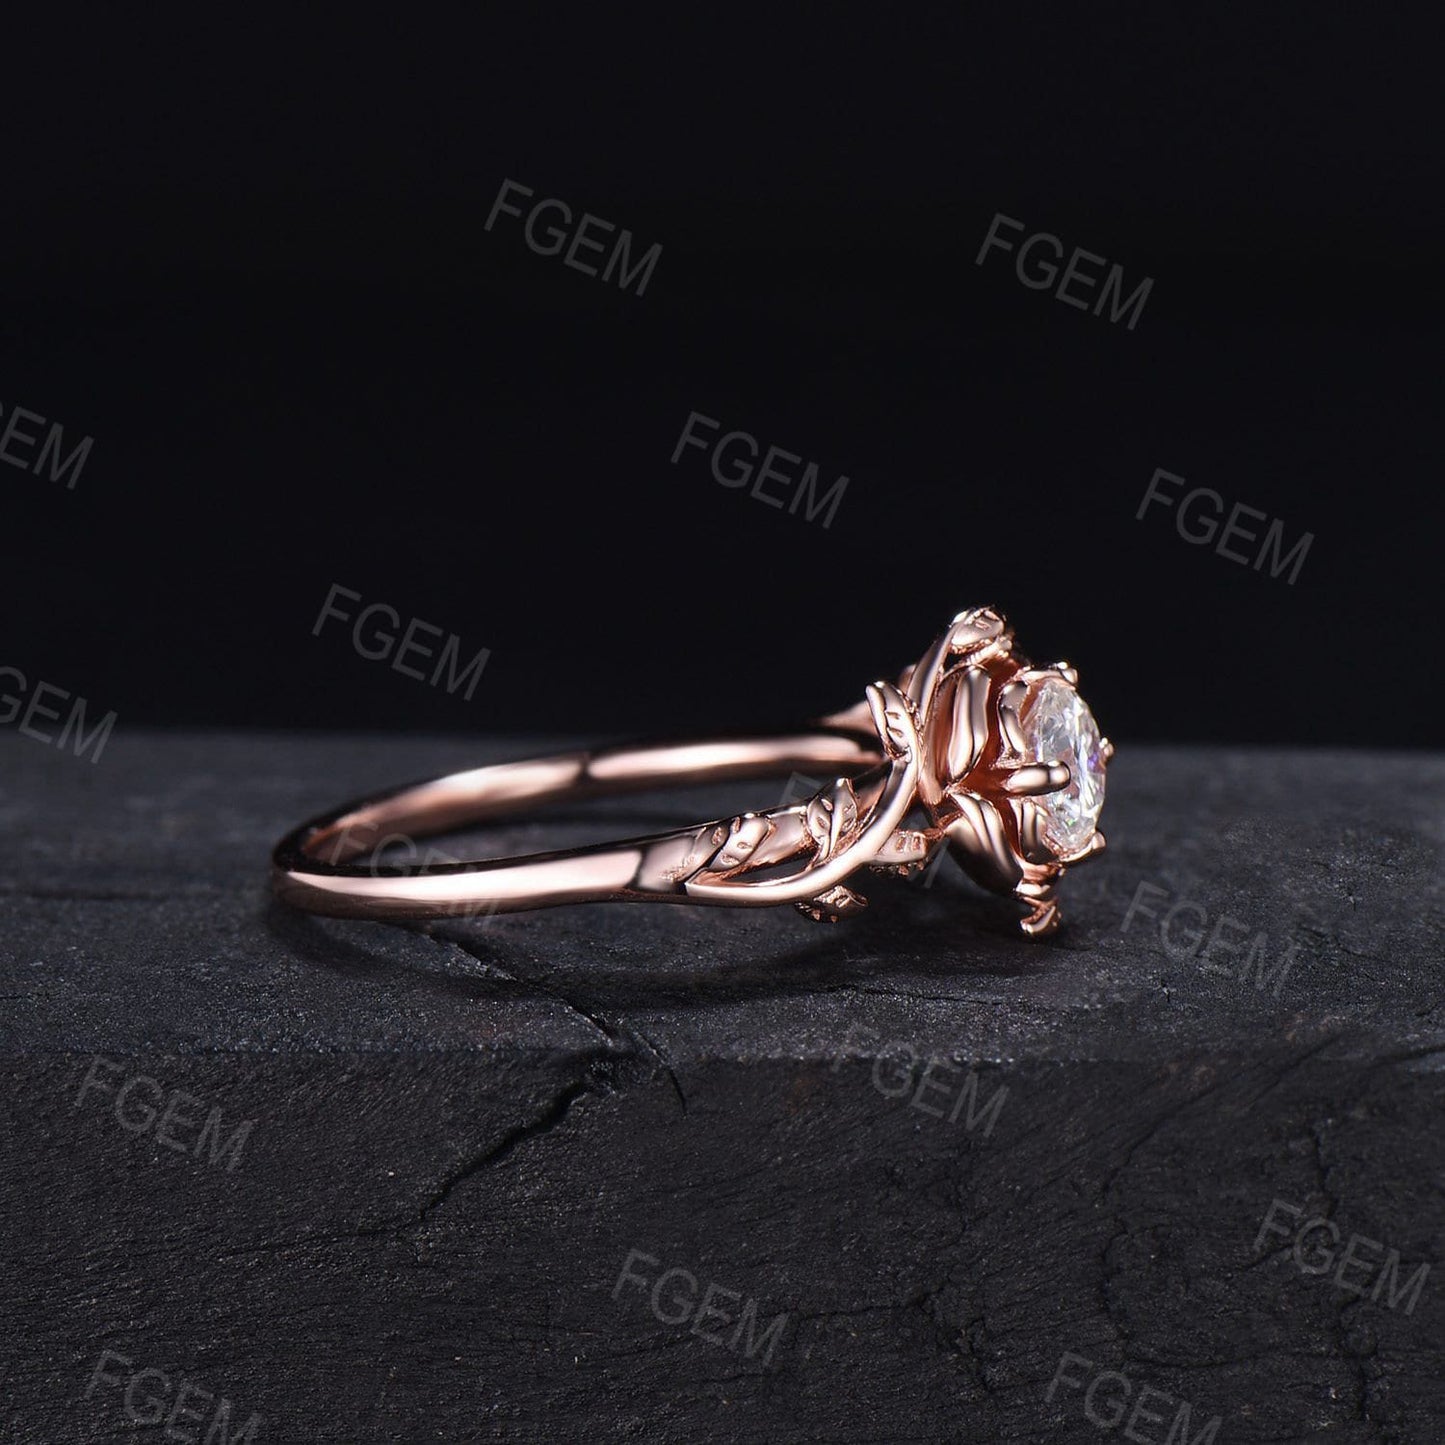 10k rose gold ring for gibbycates@gmail.com